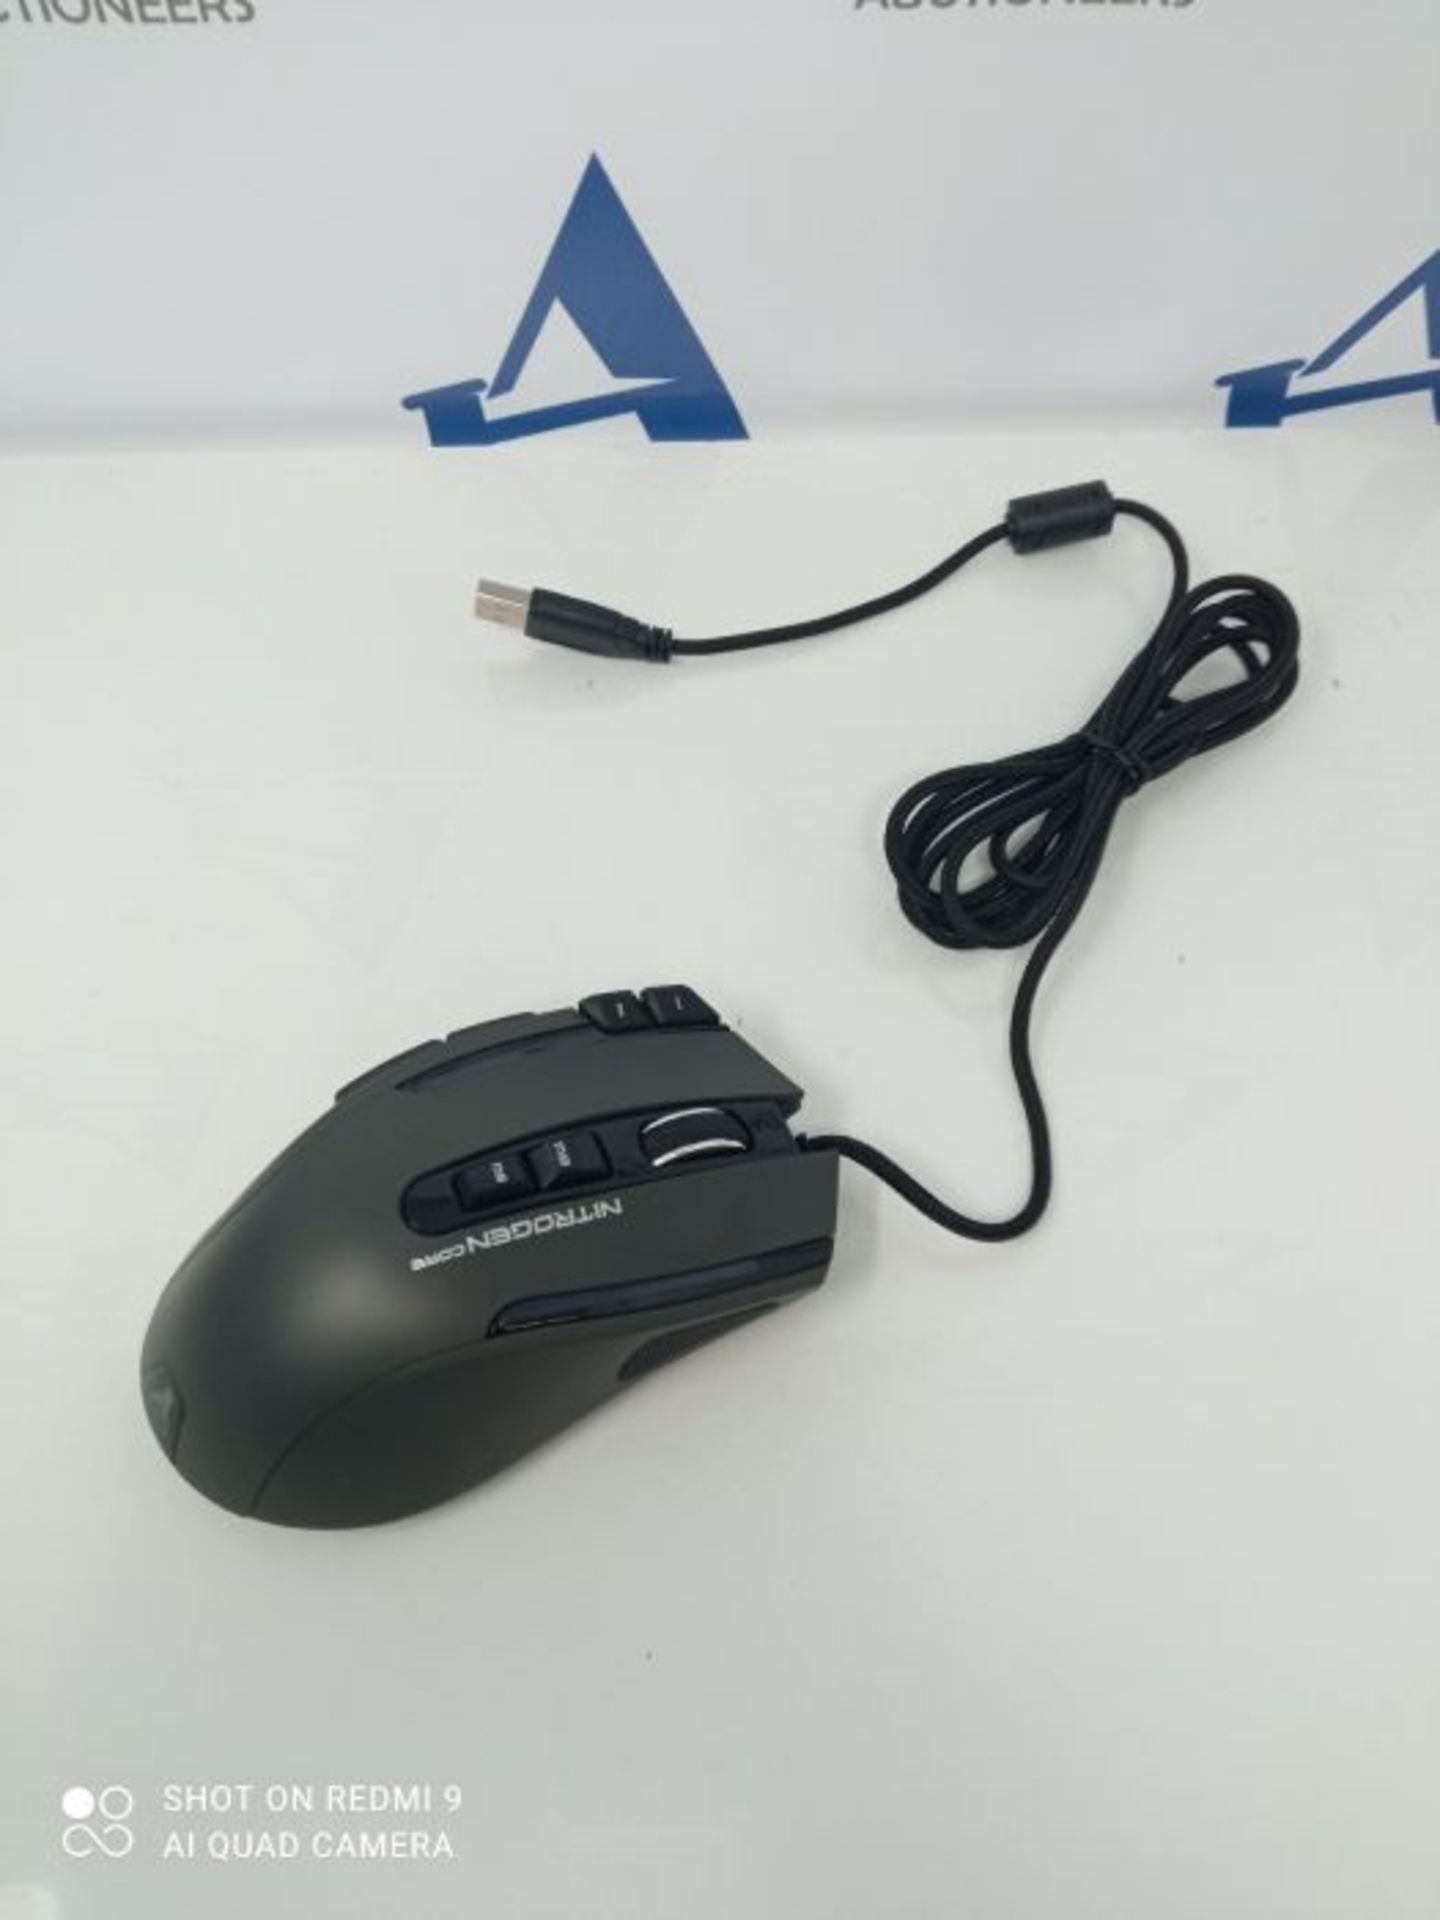 G-LAB Kult NITROGEN Core High Performance Wired Gaming Mouse - Avago 10,000 DPI Optica - Image 3 of 3